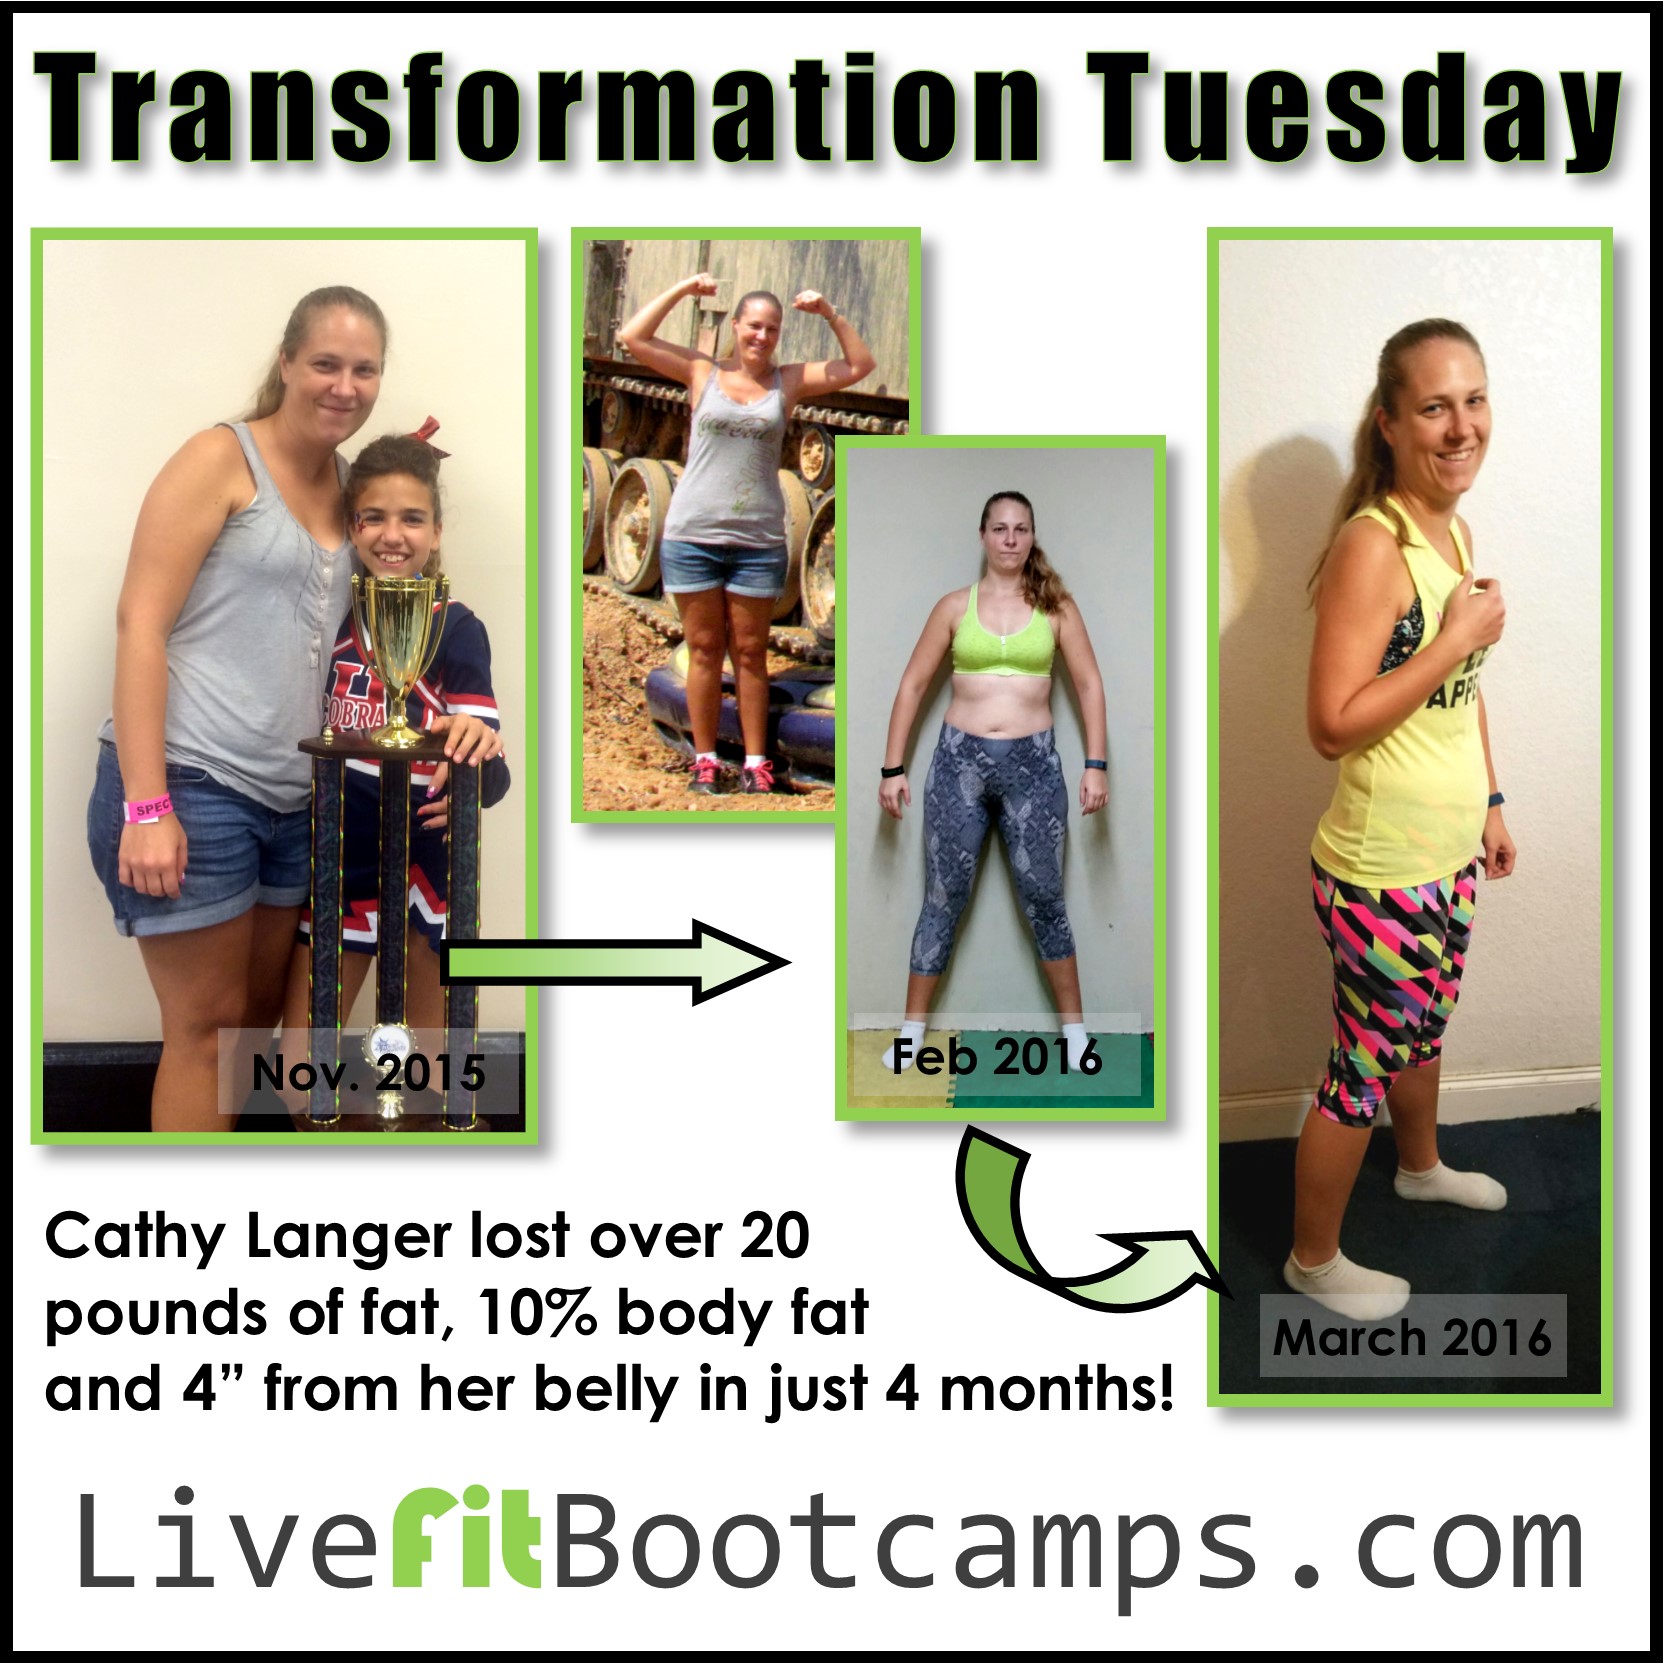 Lose 20 pounds by summer? No problem! (Cathy’s personal story)